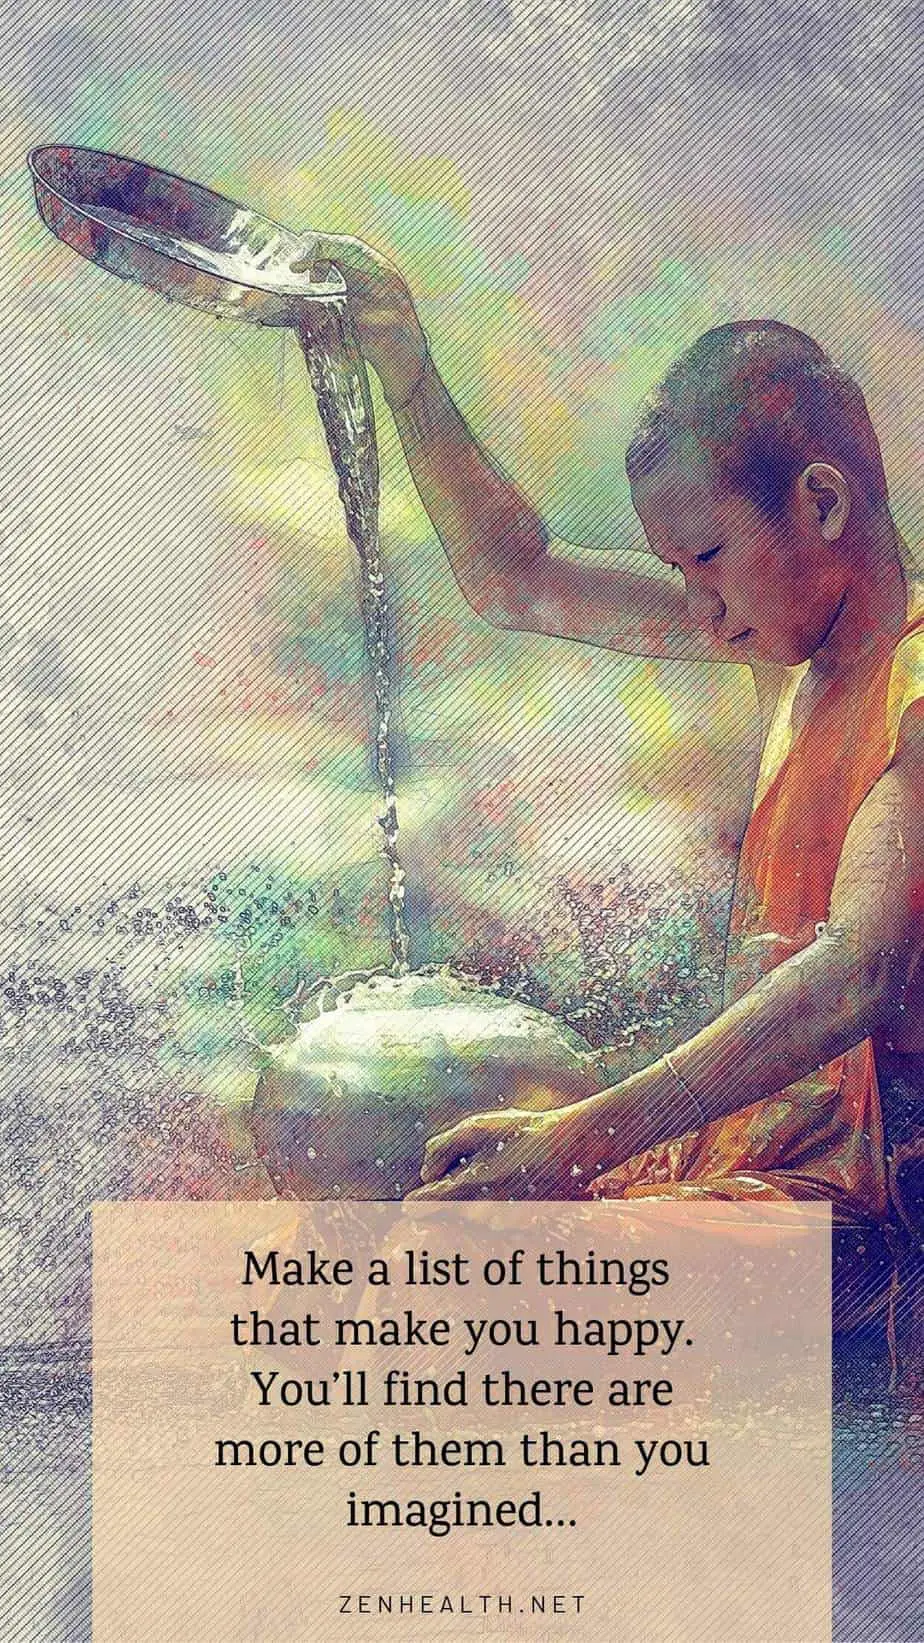 Make a list of things that make you happy. You'll find there are more of them than you imagined...    